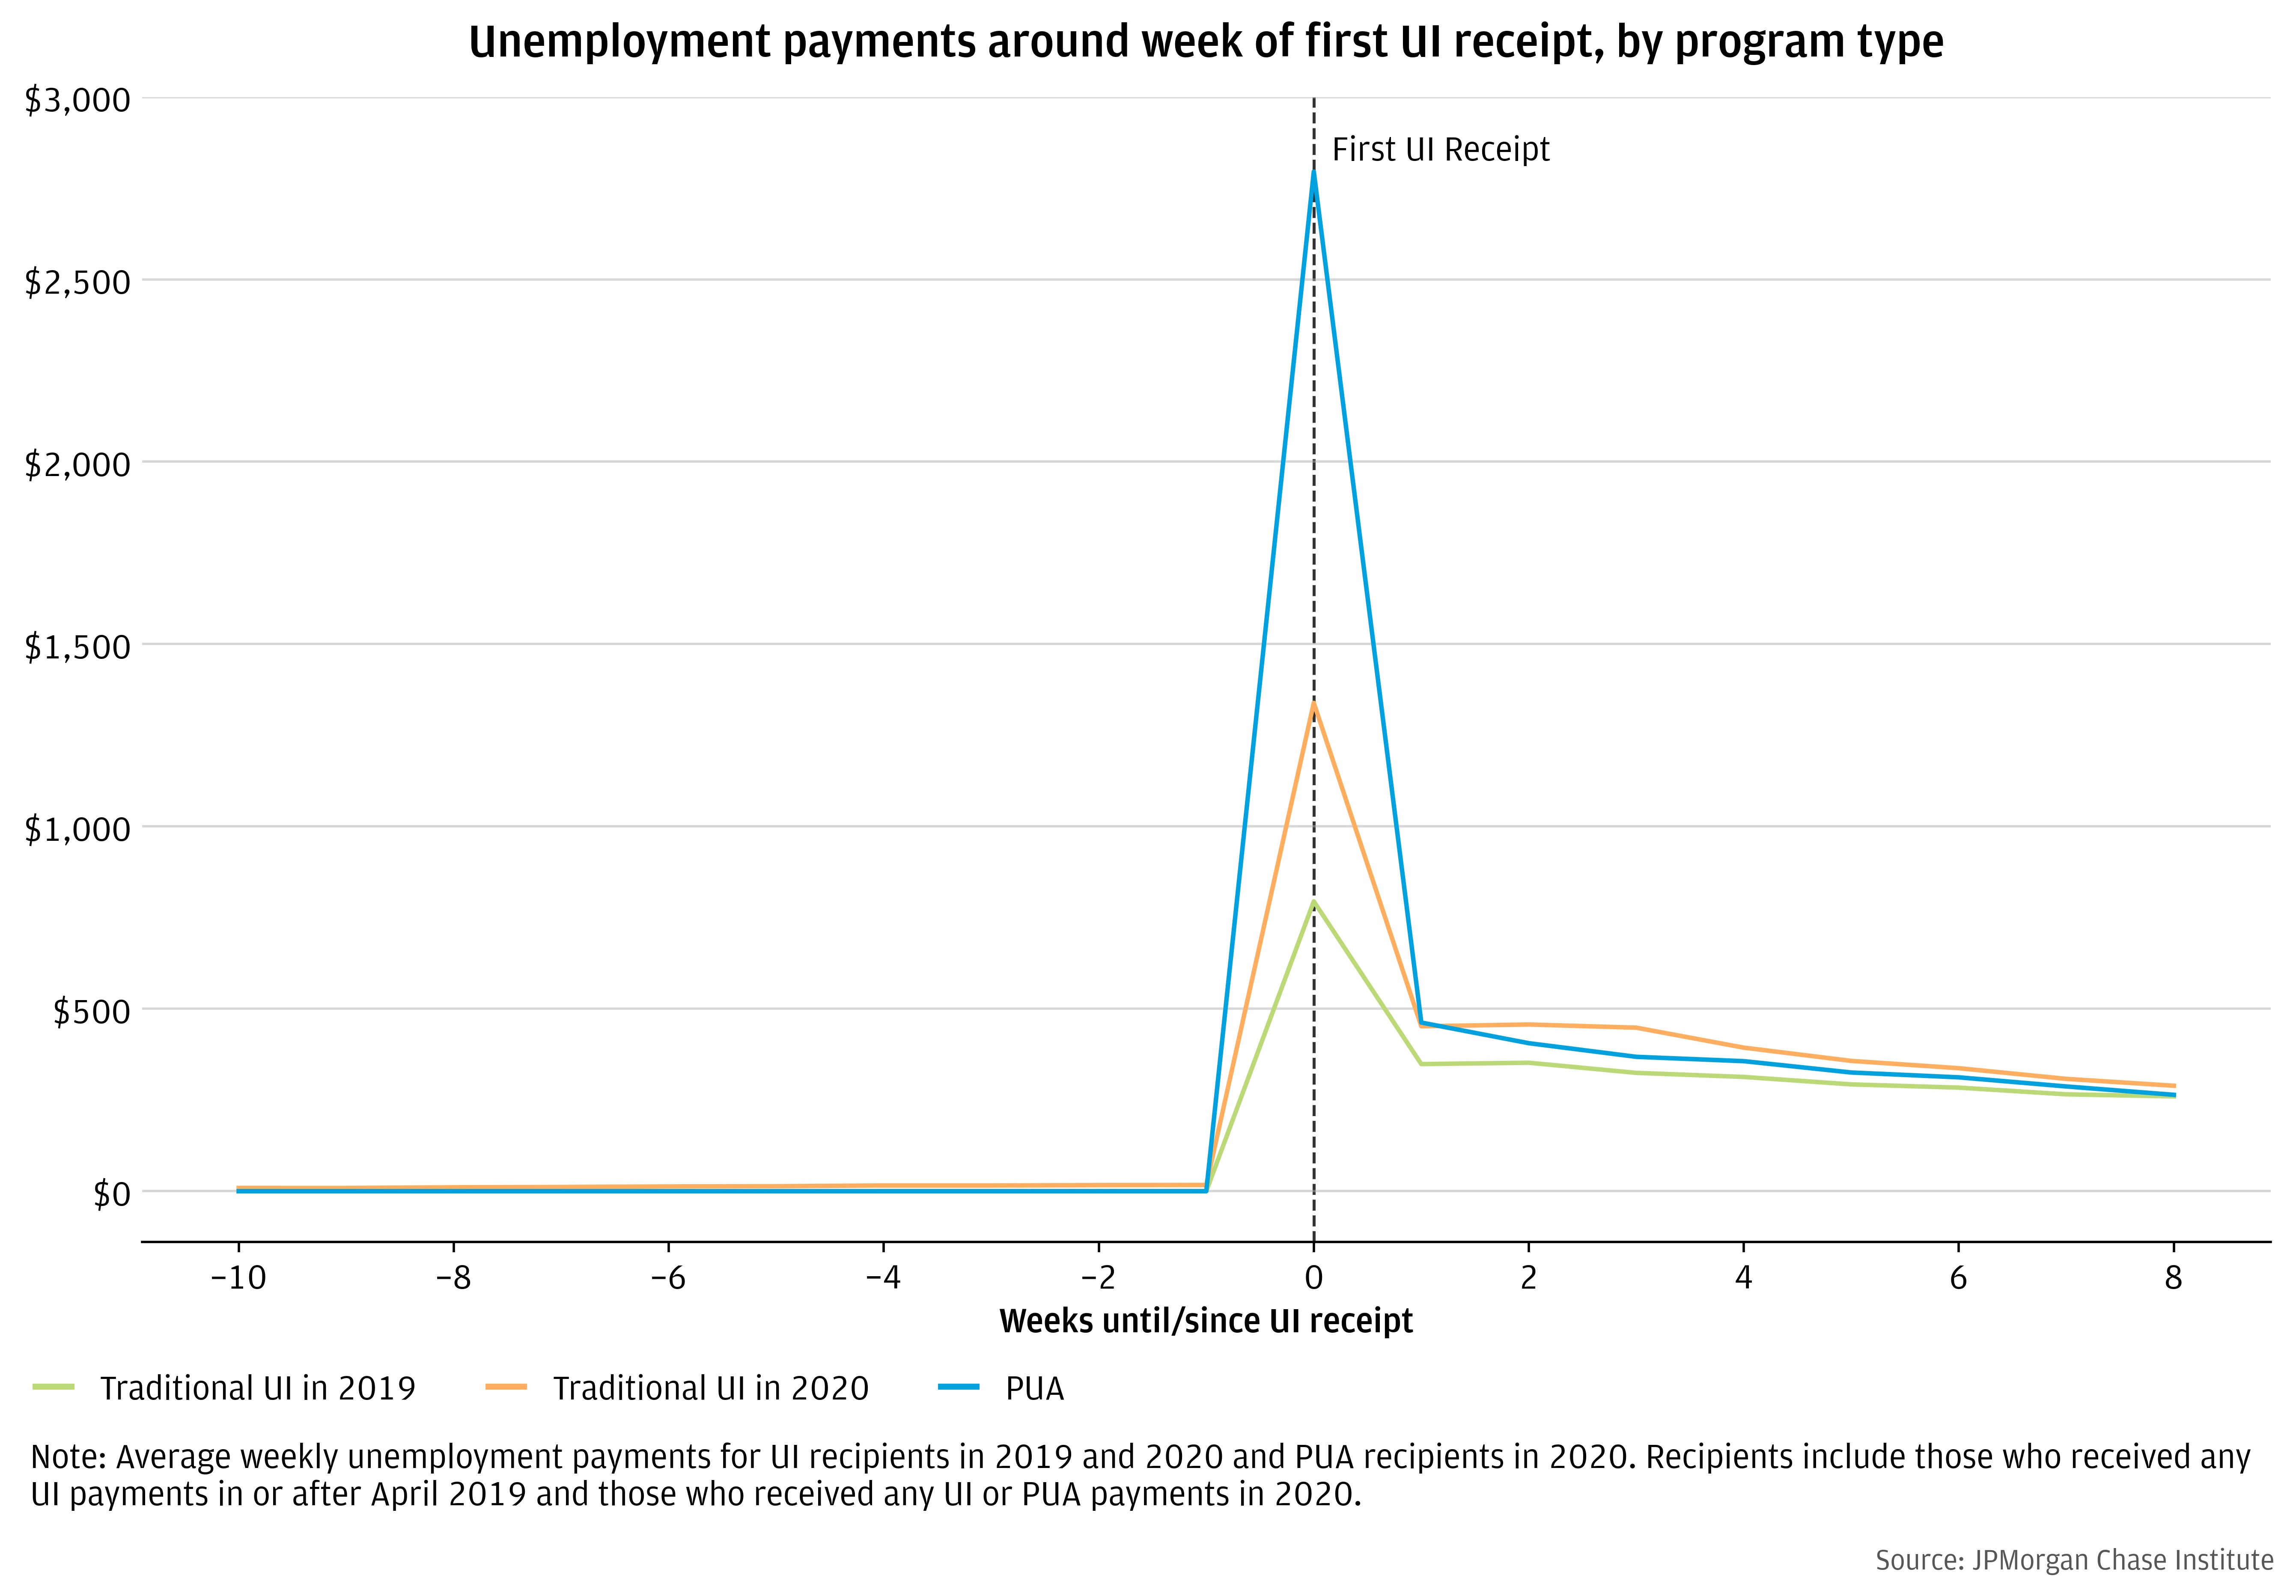 PUA recipients received much larger initial UI benefit payments than traditional UI recipients, indicating much longer delays in benefit receipt